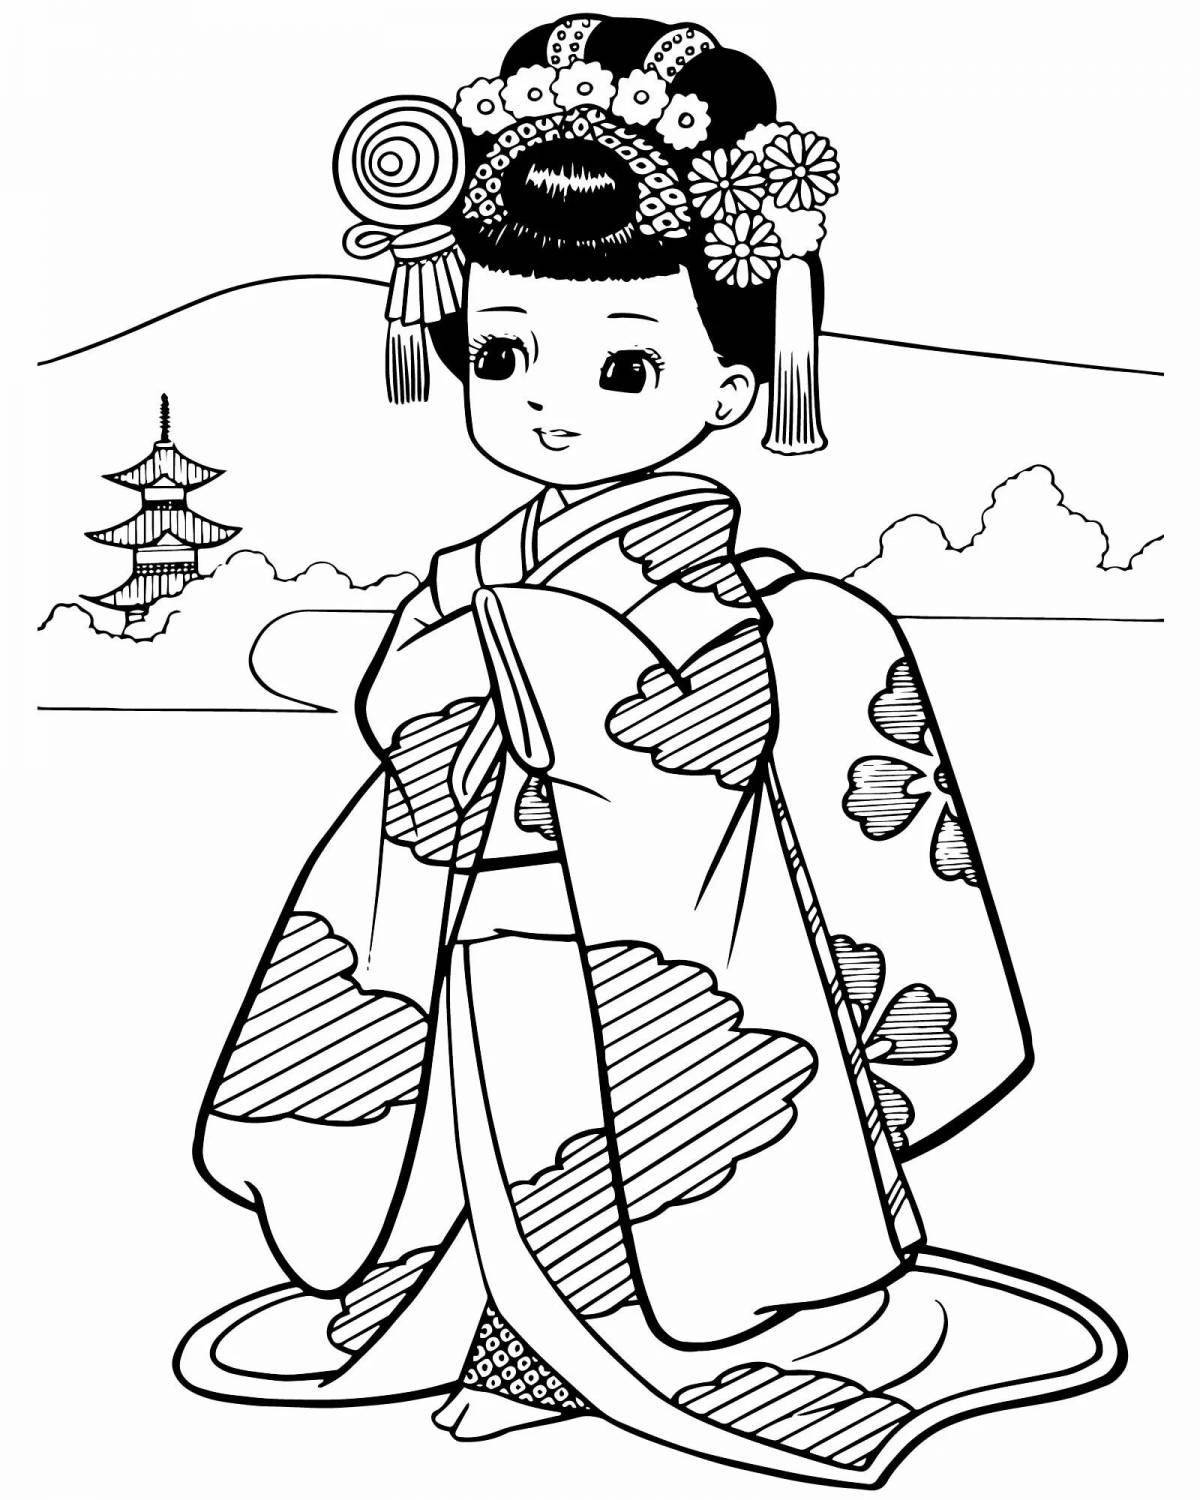 Glorious japan coloring book for kids